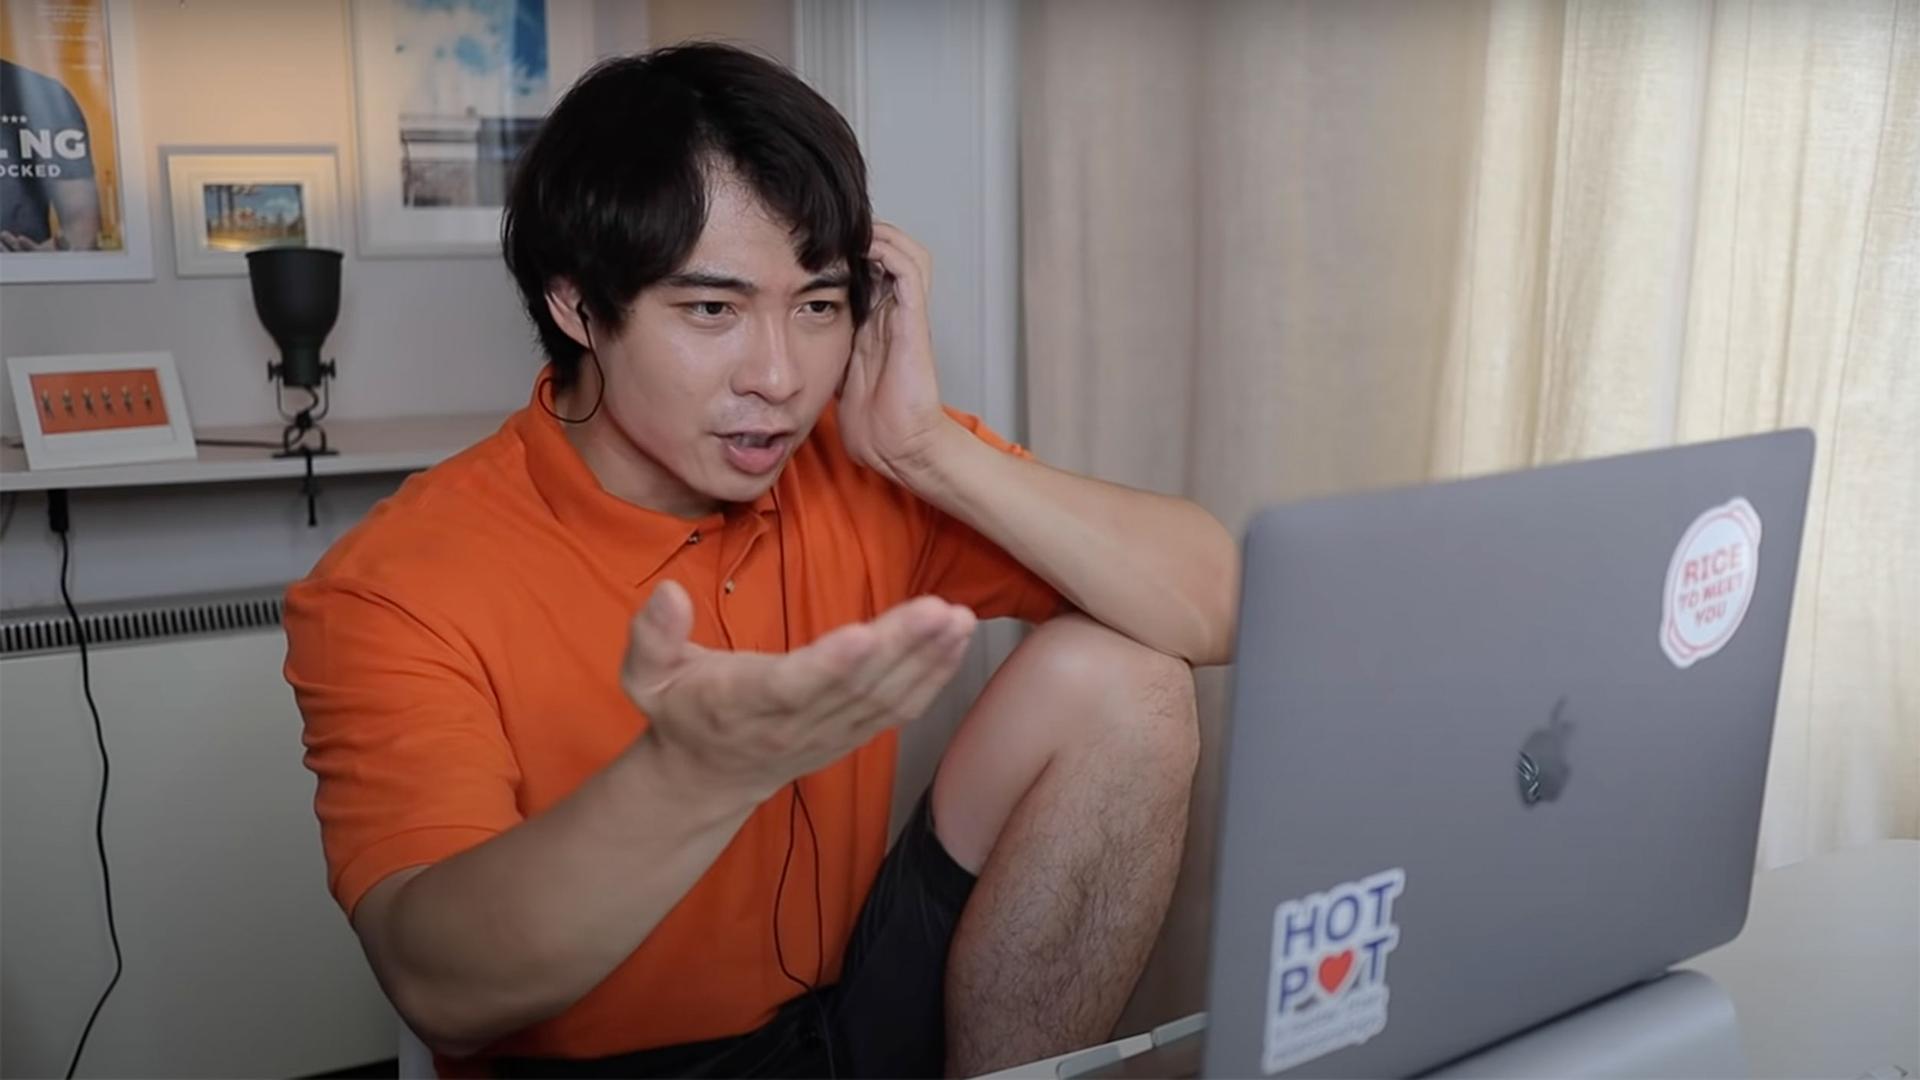 Malaysian Chinese comedian Nigel Ng poses as "Uncle Roger" to critique people's culinary endeavors. His YouTube channel has nearly half a billion views.